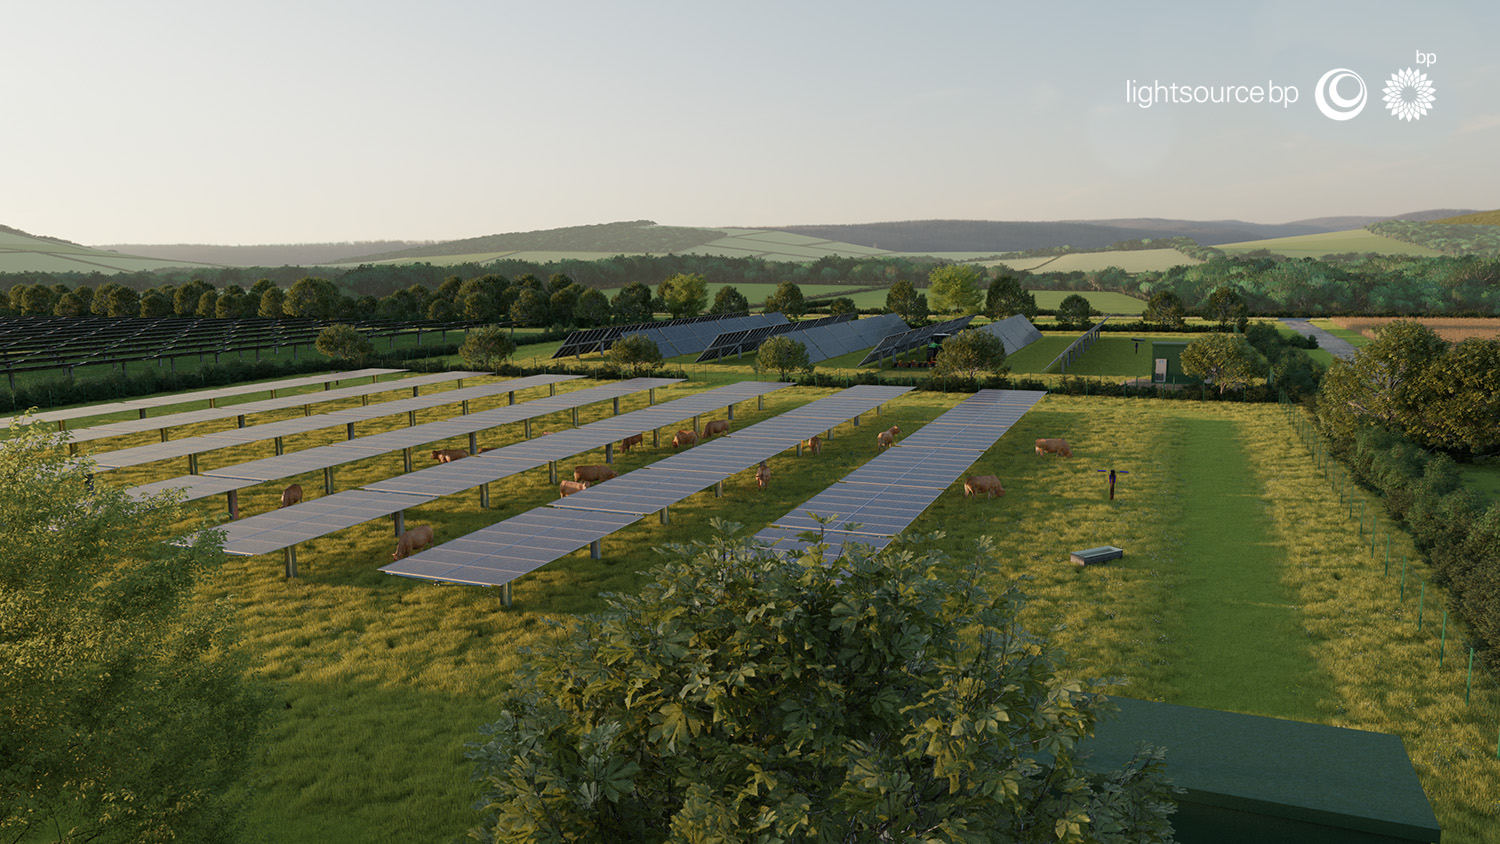 Render image of cows grazing under solar panels at Henroux solar site